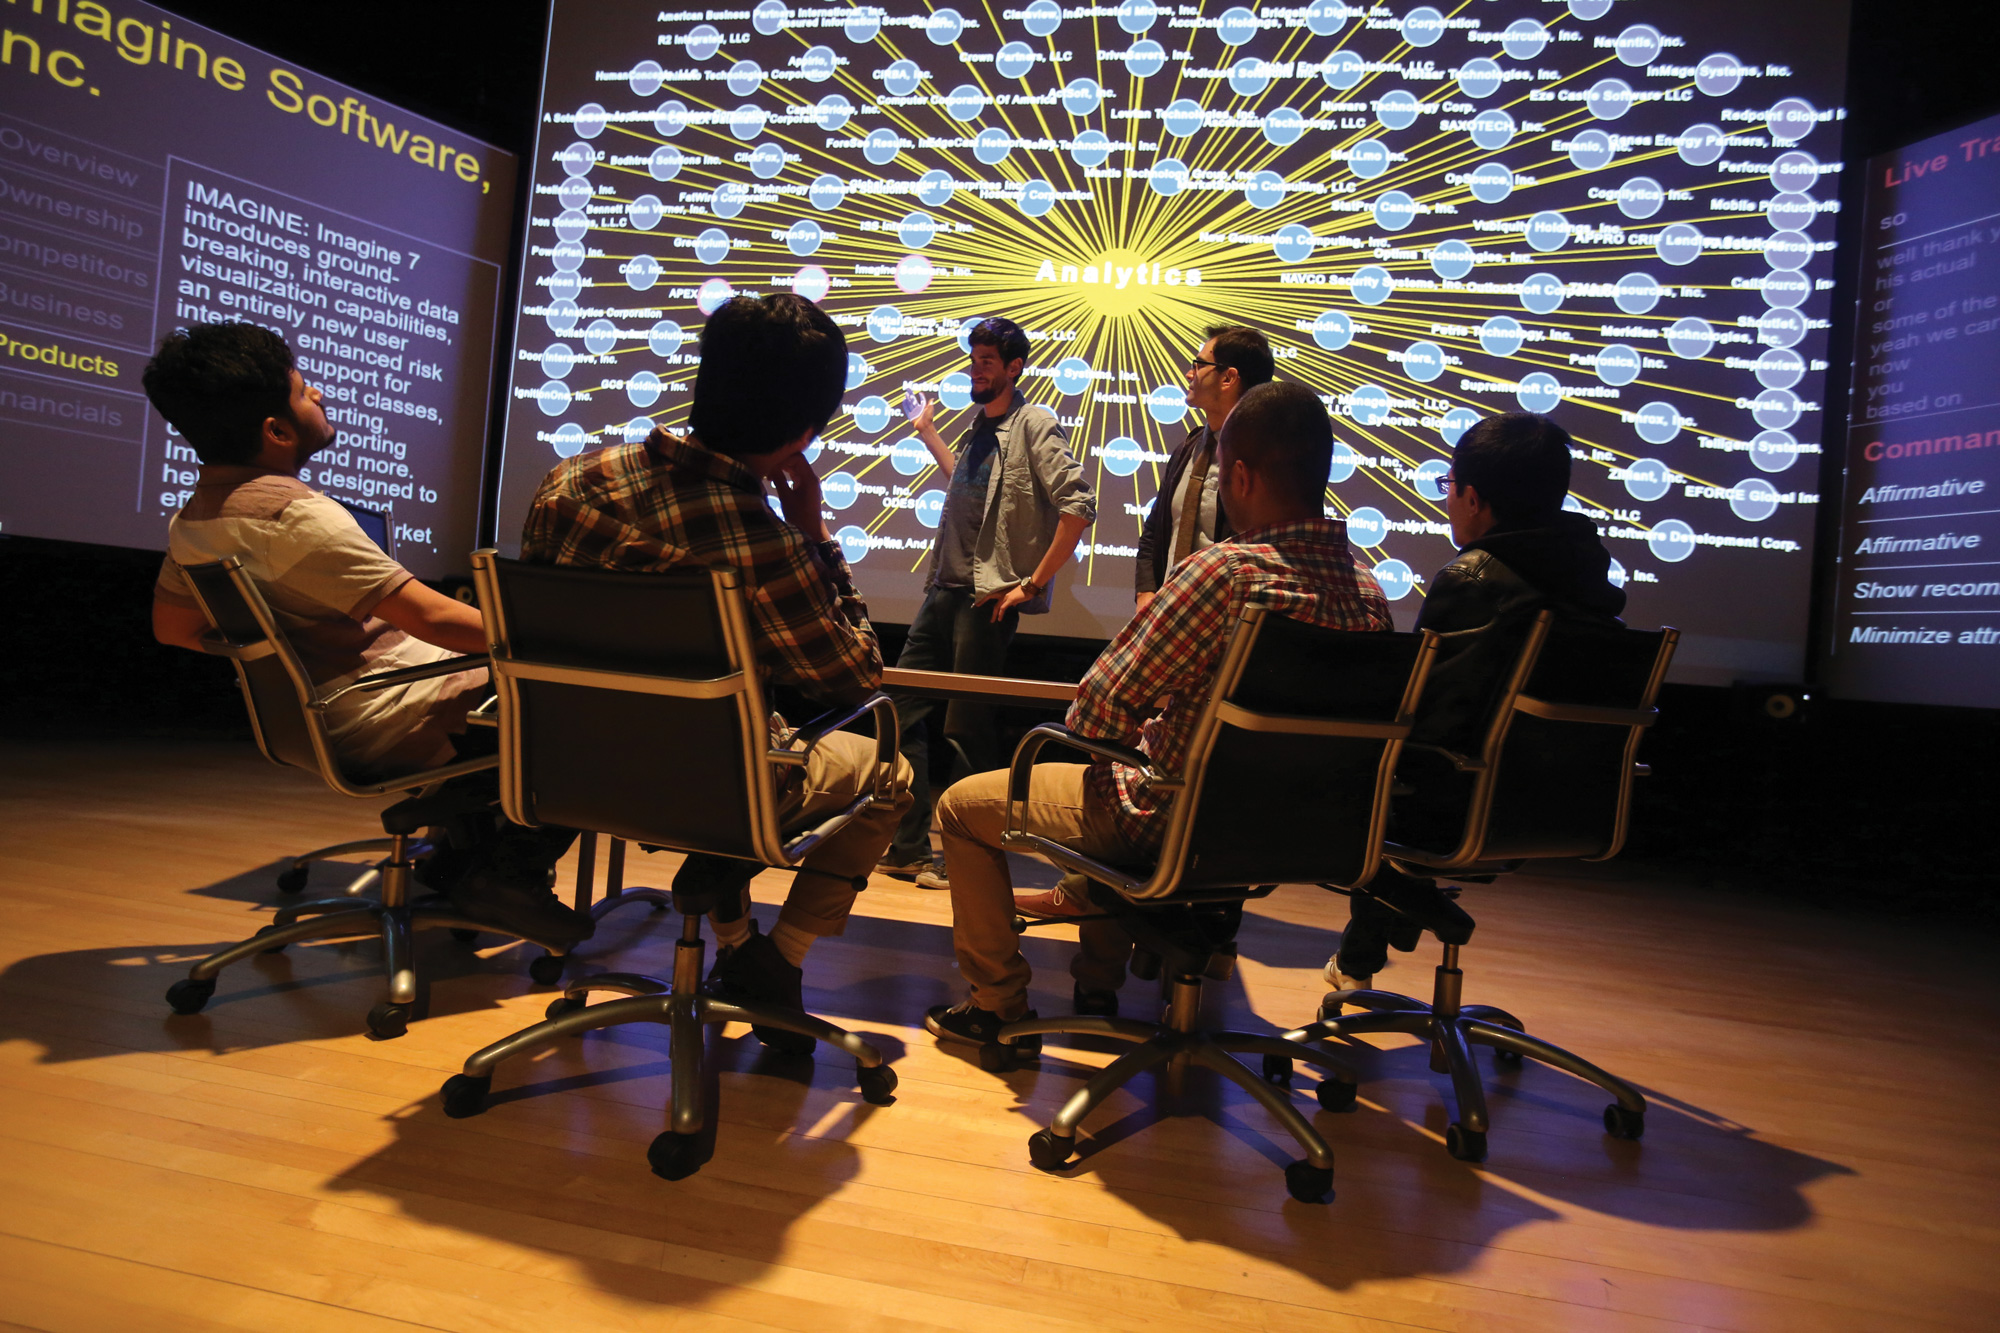 a group of four students facing two students giving a presentation in front of large screens with projections on them